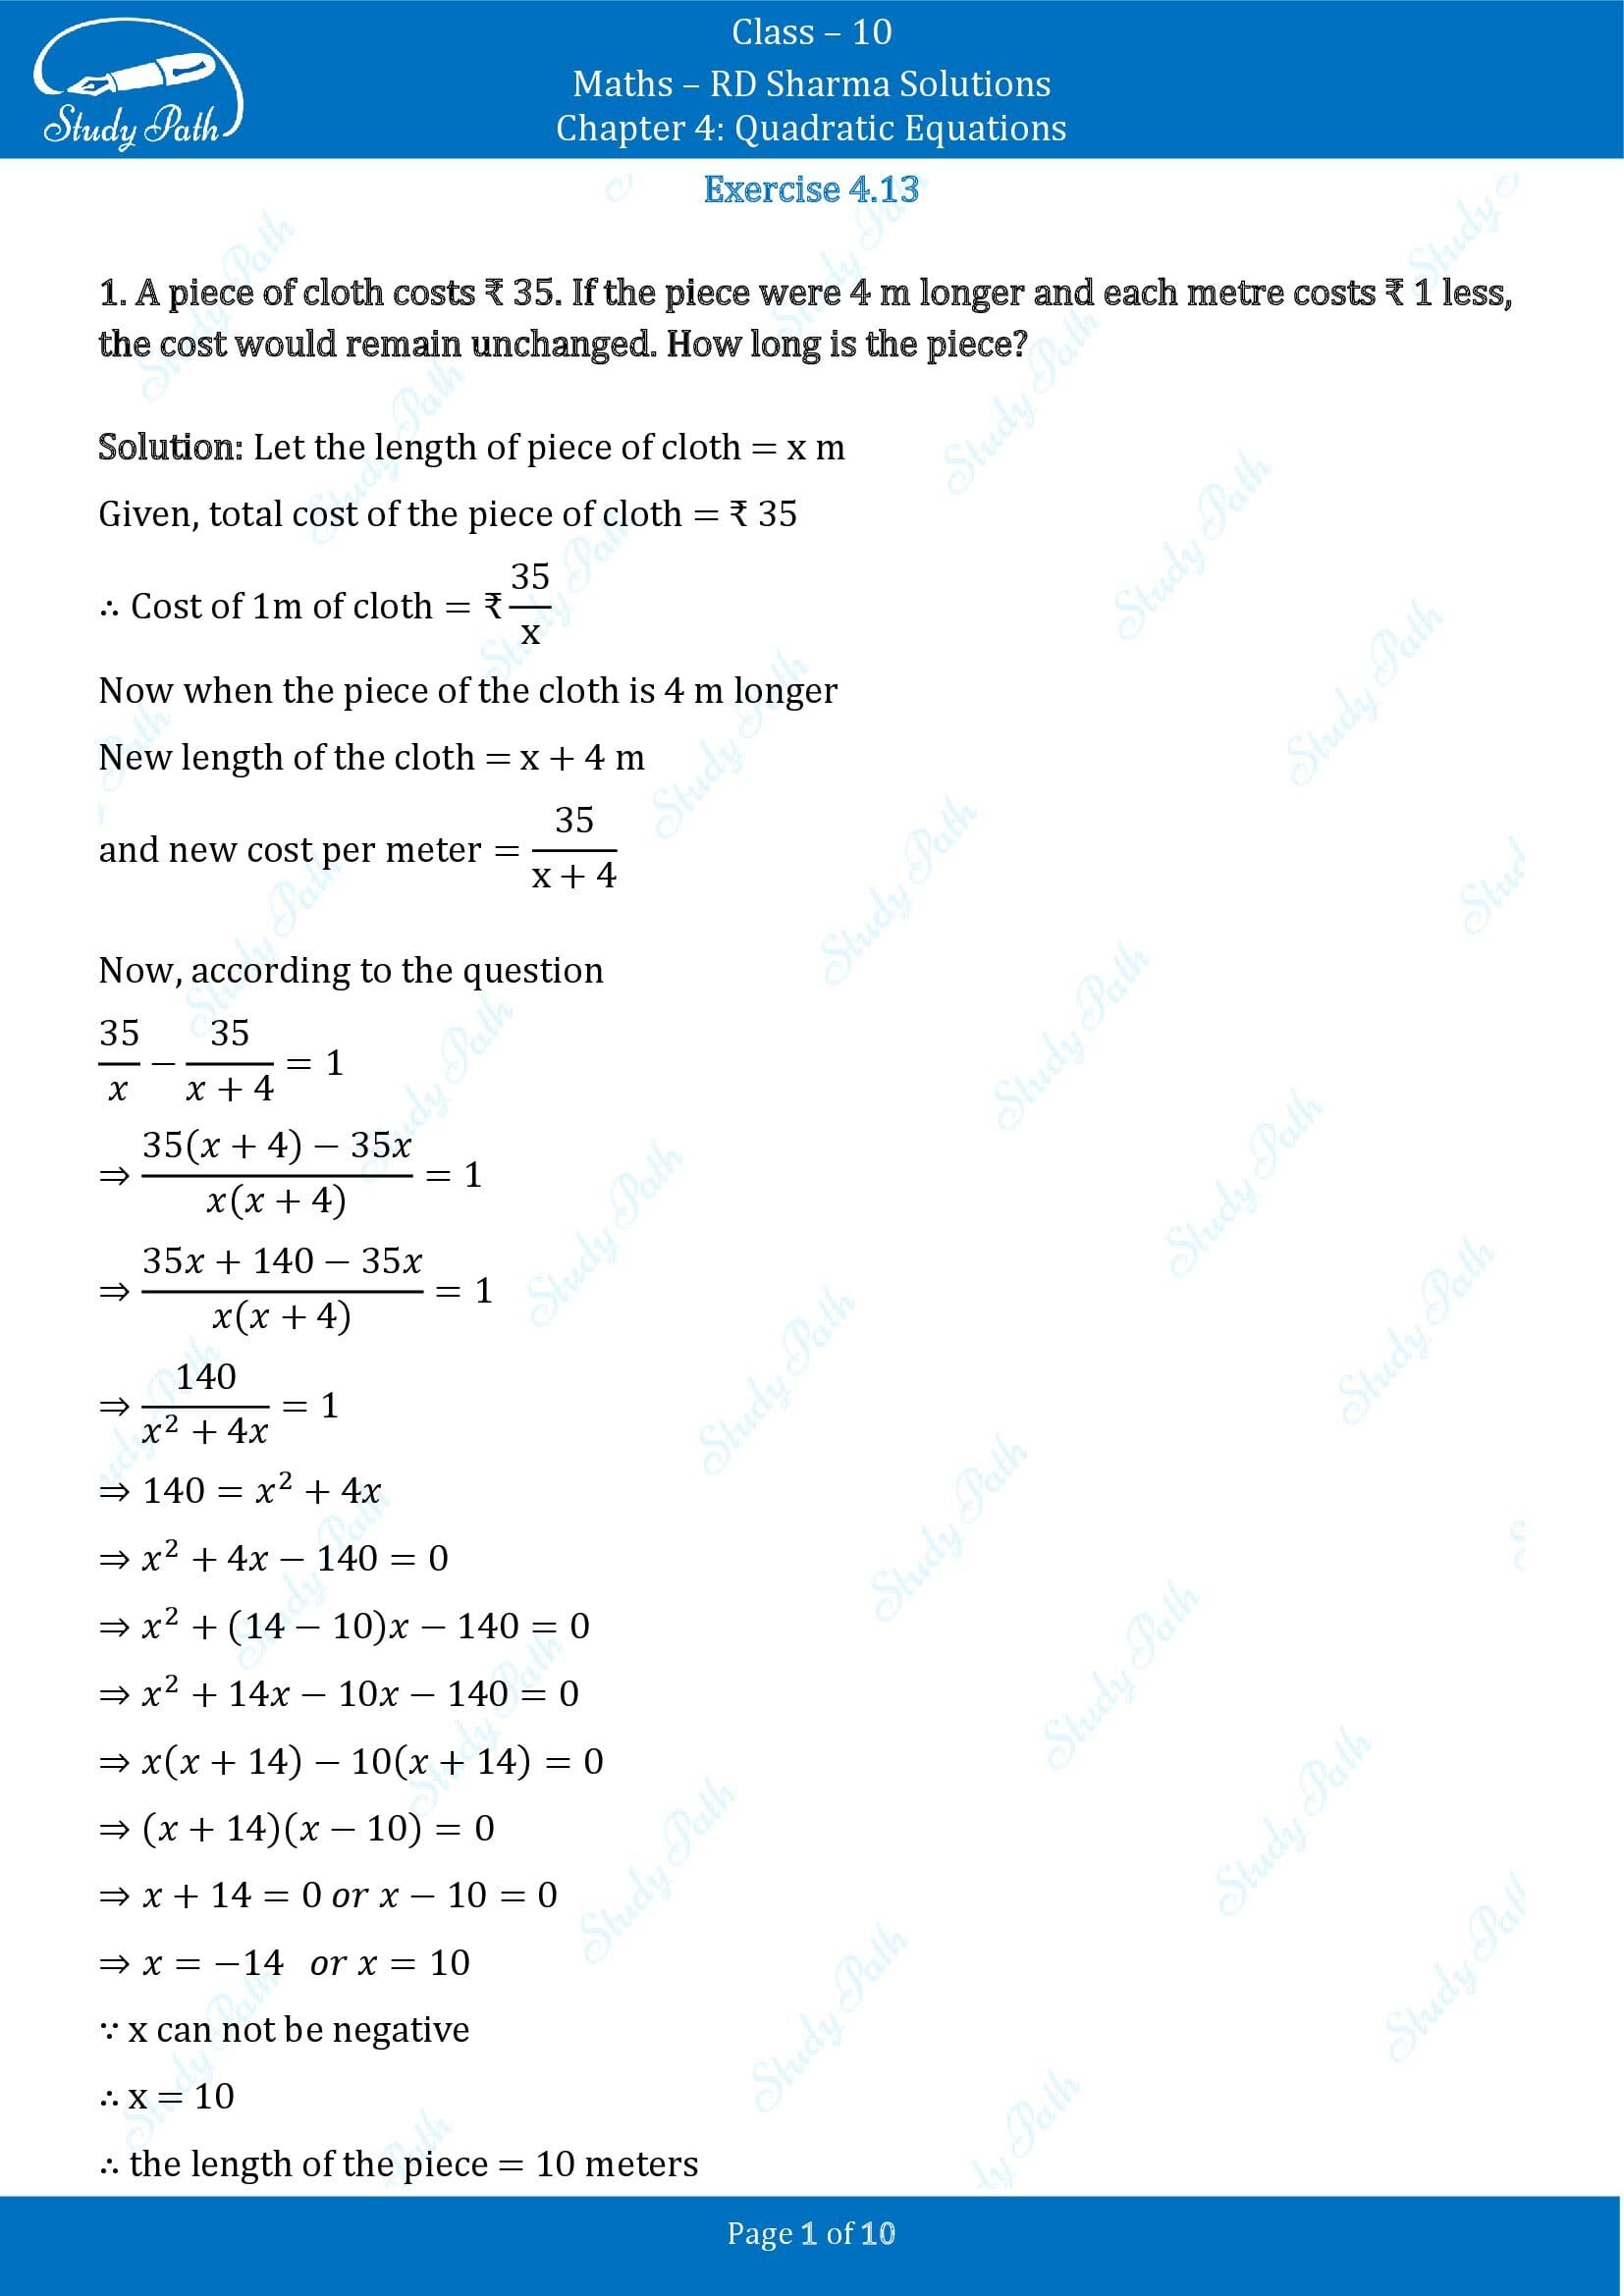 RD Sharma Solutions Class 10 Chapter 4 Quadratic Equations Exercise 4.13 00001